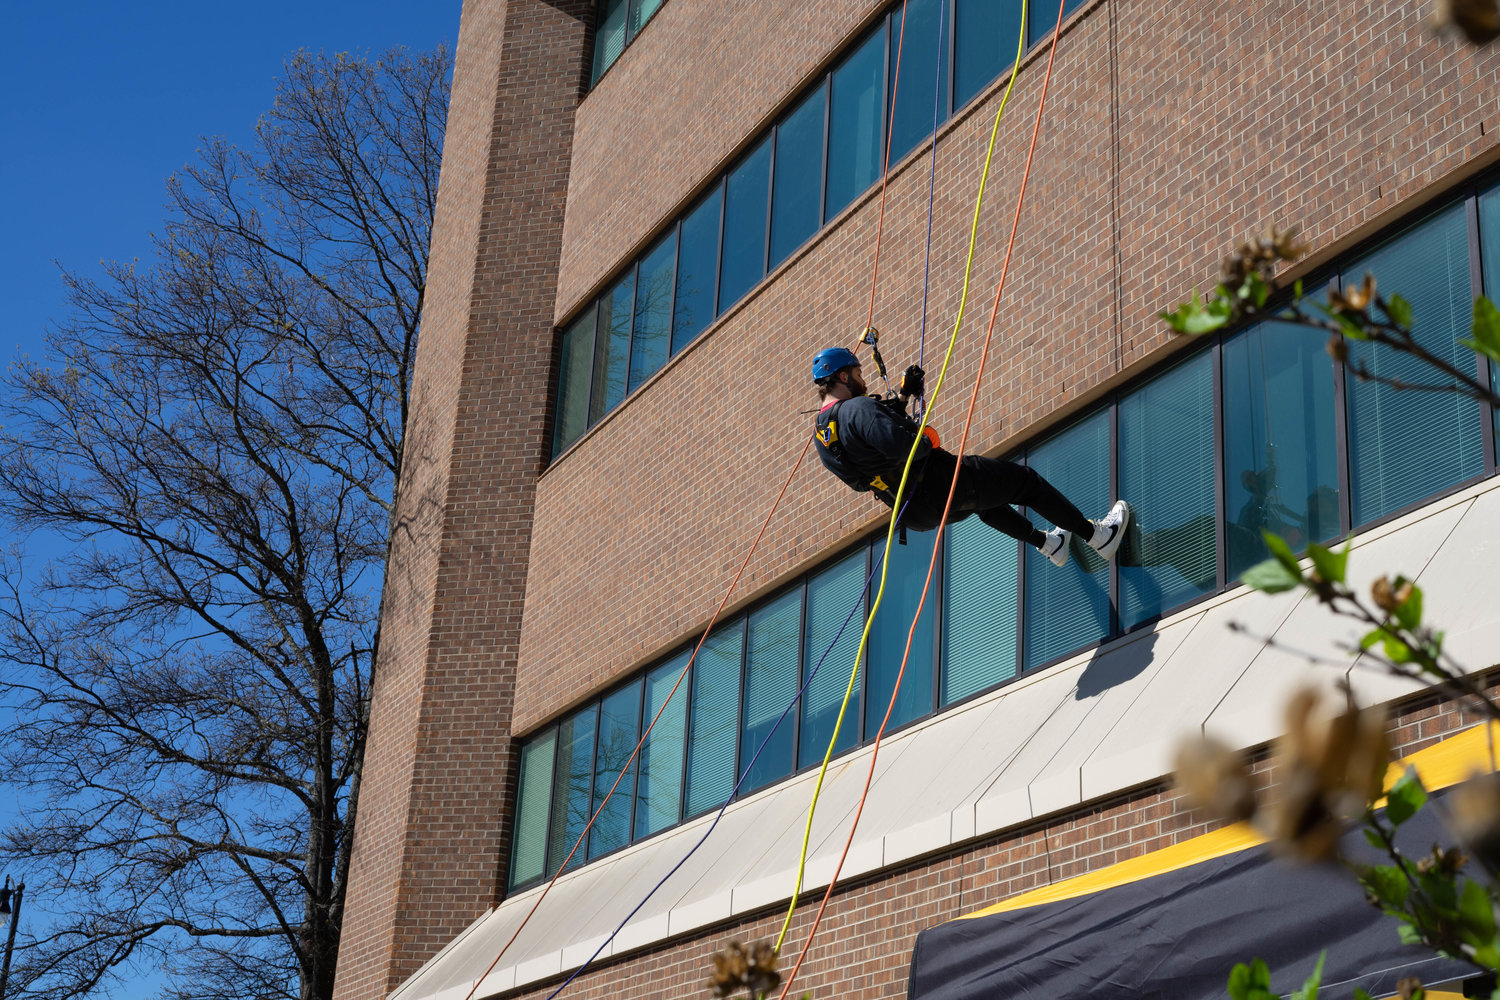 A volunteer slowly rappels down the building at United Way's Over the Edge fundraiser.